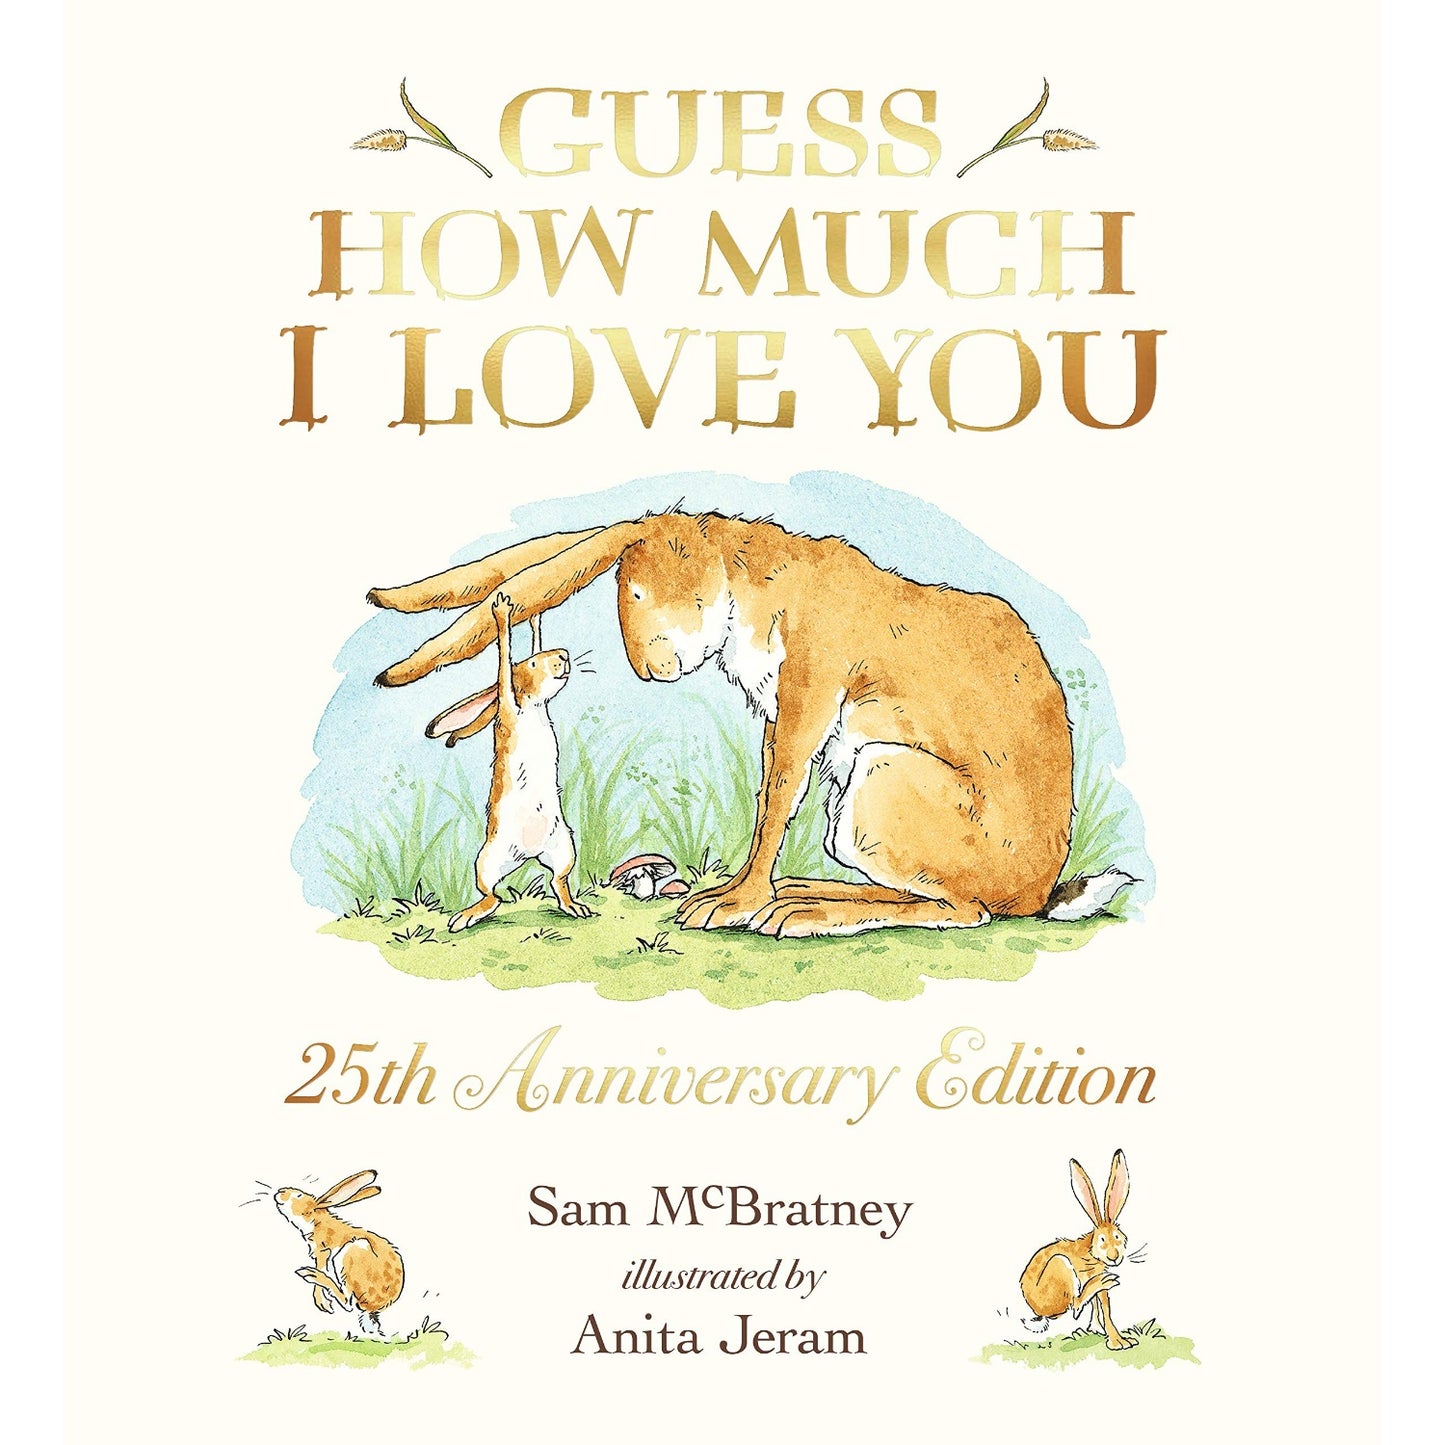 Guess How Much I Love You | Children’s Book on Feelings | Anniversary Edition